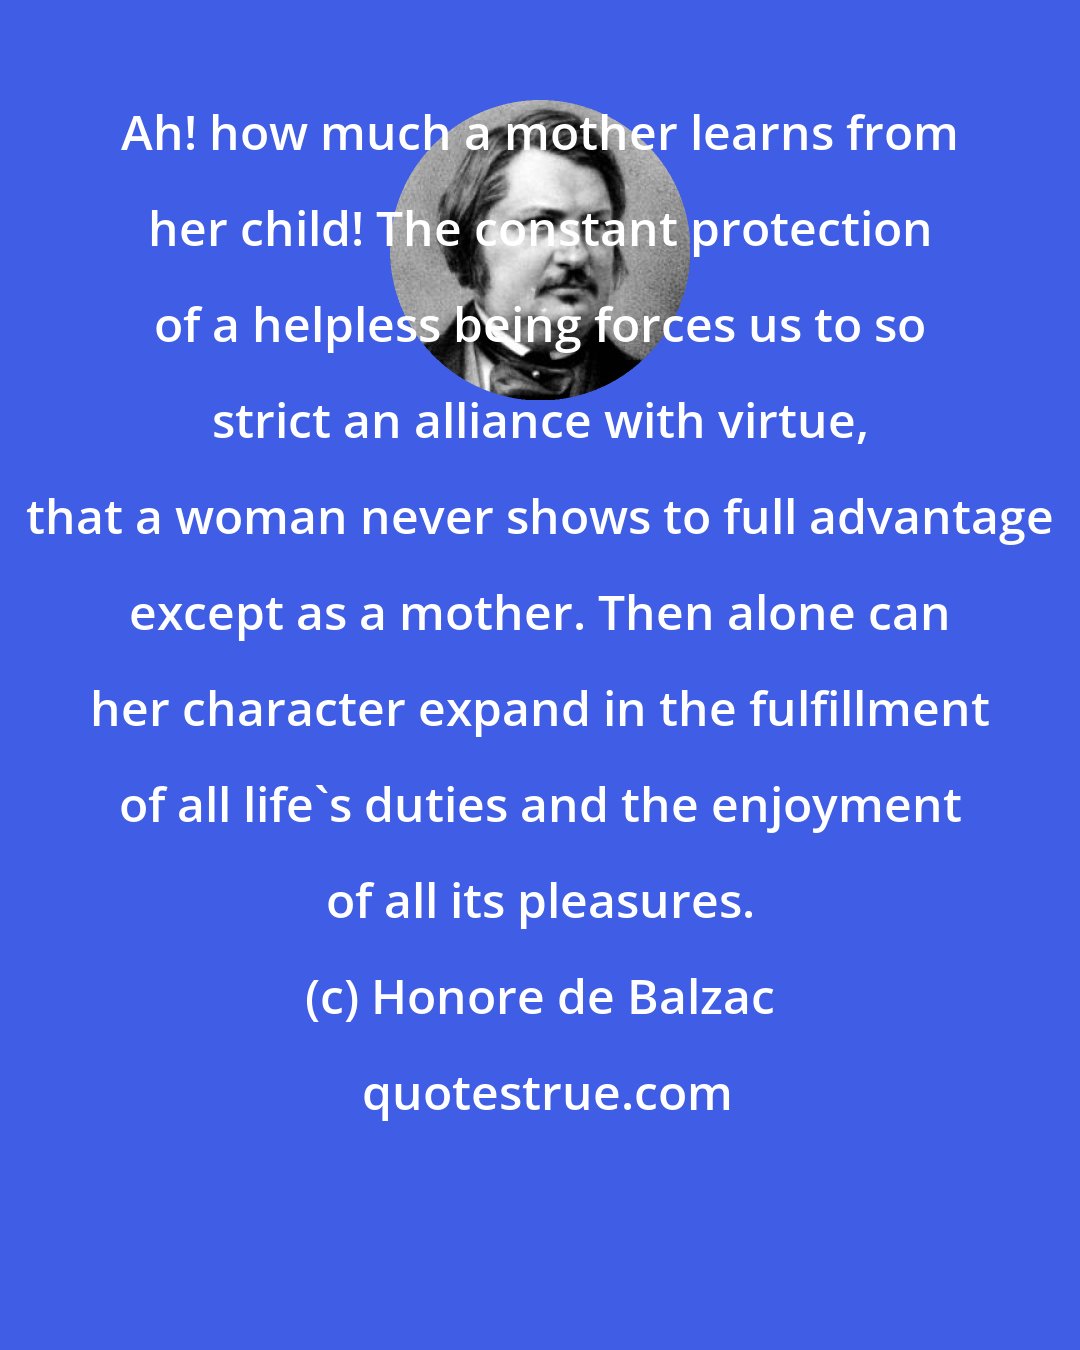 Honore de Balzac: Ah! how much a mother learns from her child! The constant protection of a helpless being forces us to so strict an alliance with virtue, that a woman never shows to full advantage except as a mother. Then alone can her character expand in the fulfillment of all life's duties and the enjoyment of all its pleasures.